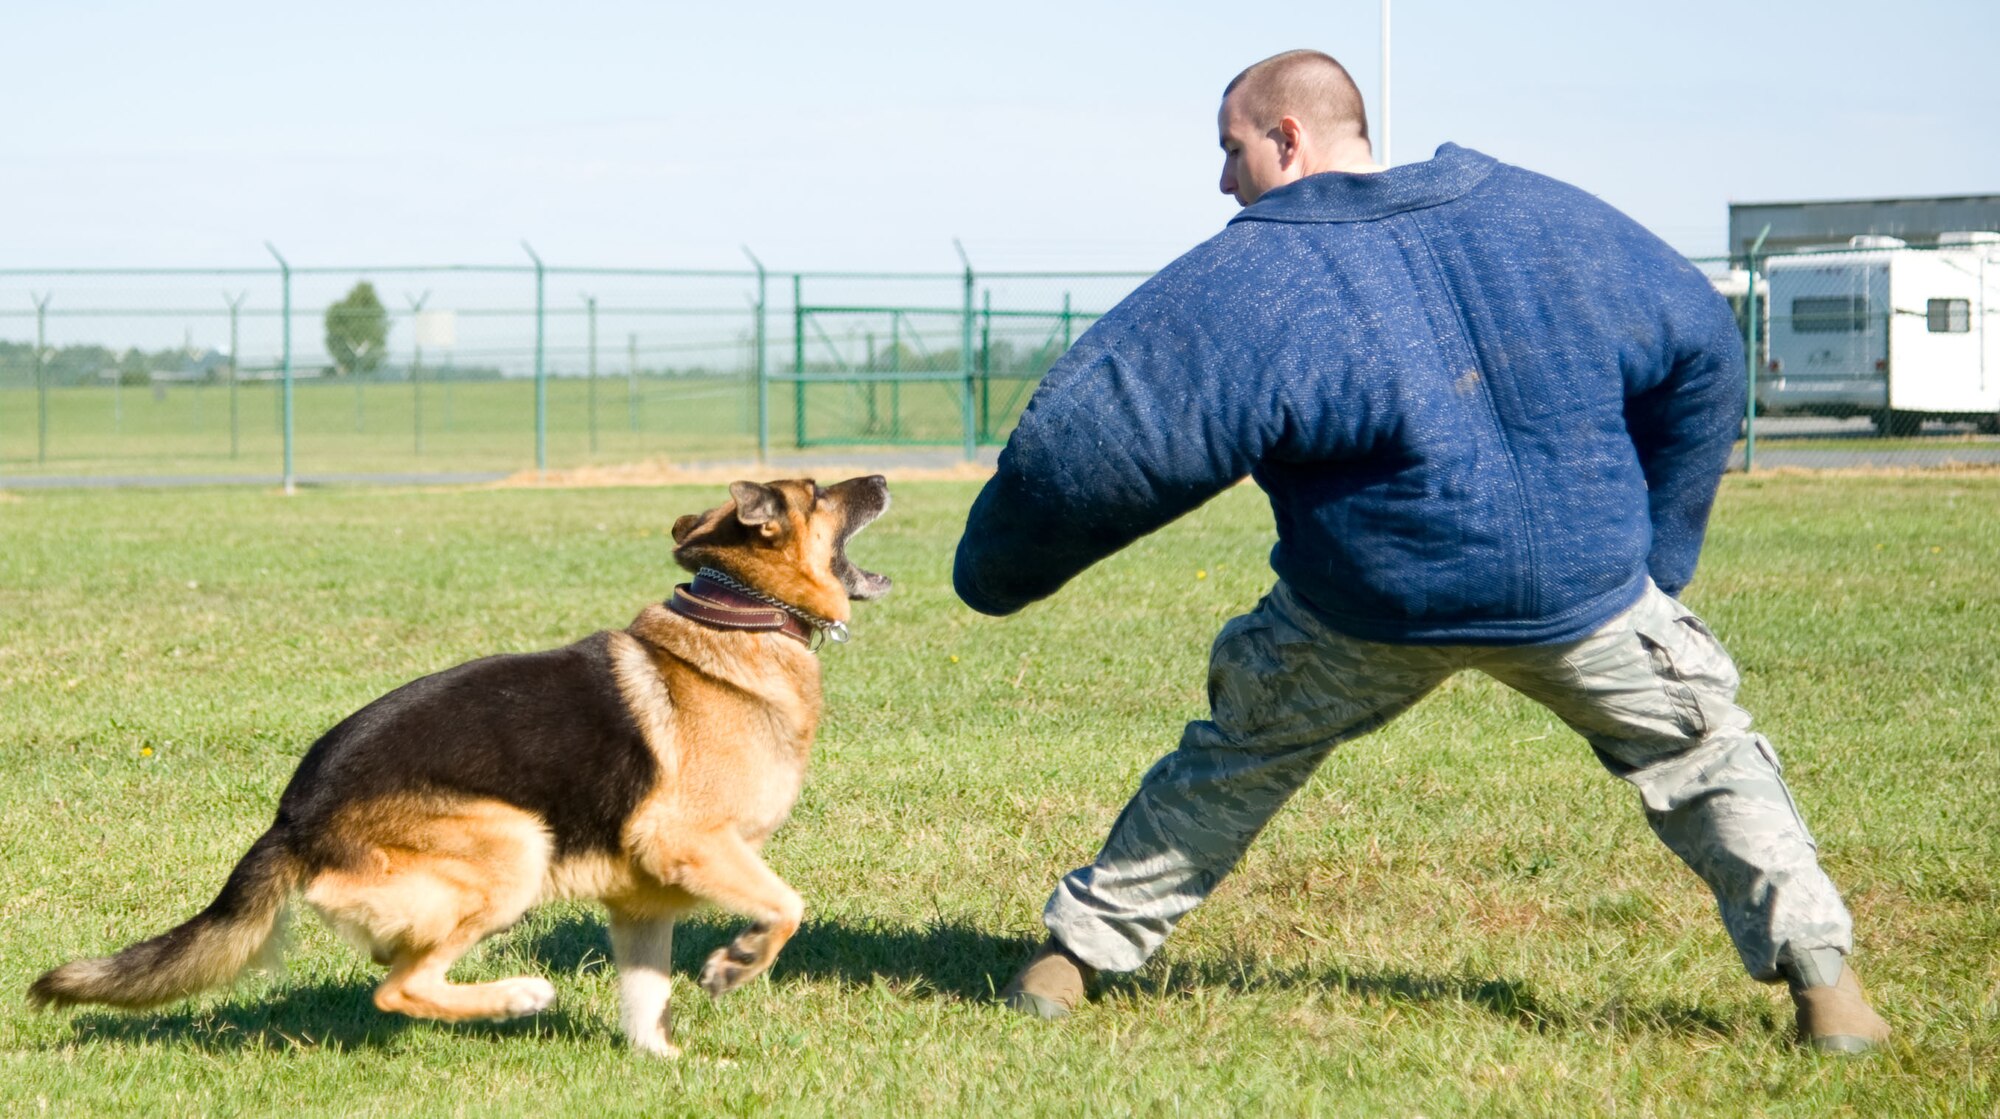 Staff Sgt. John Sutherland, military working dog handler with the 436th Security Forces Squadron, works on bite training with MWD Baddy. Military working dogs undergo extensive training to stay current in their fields. (U.S. Air Force photo by Adrian R. Rowan)